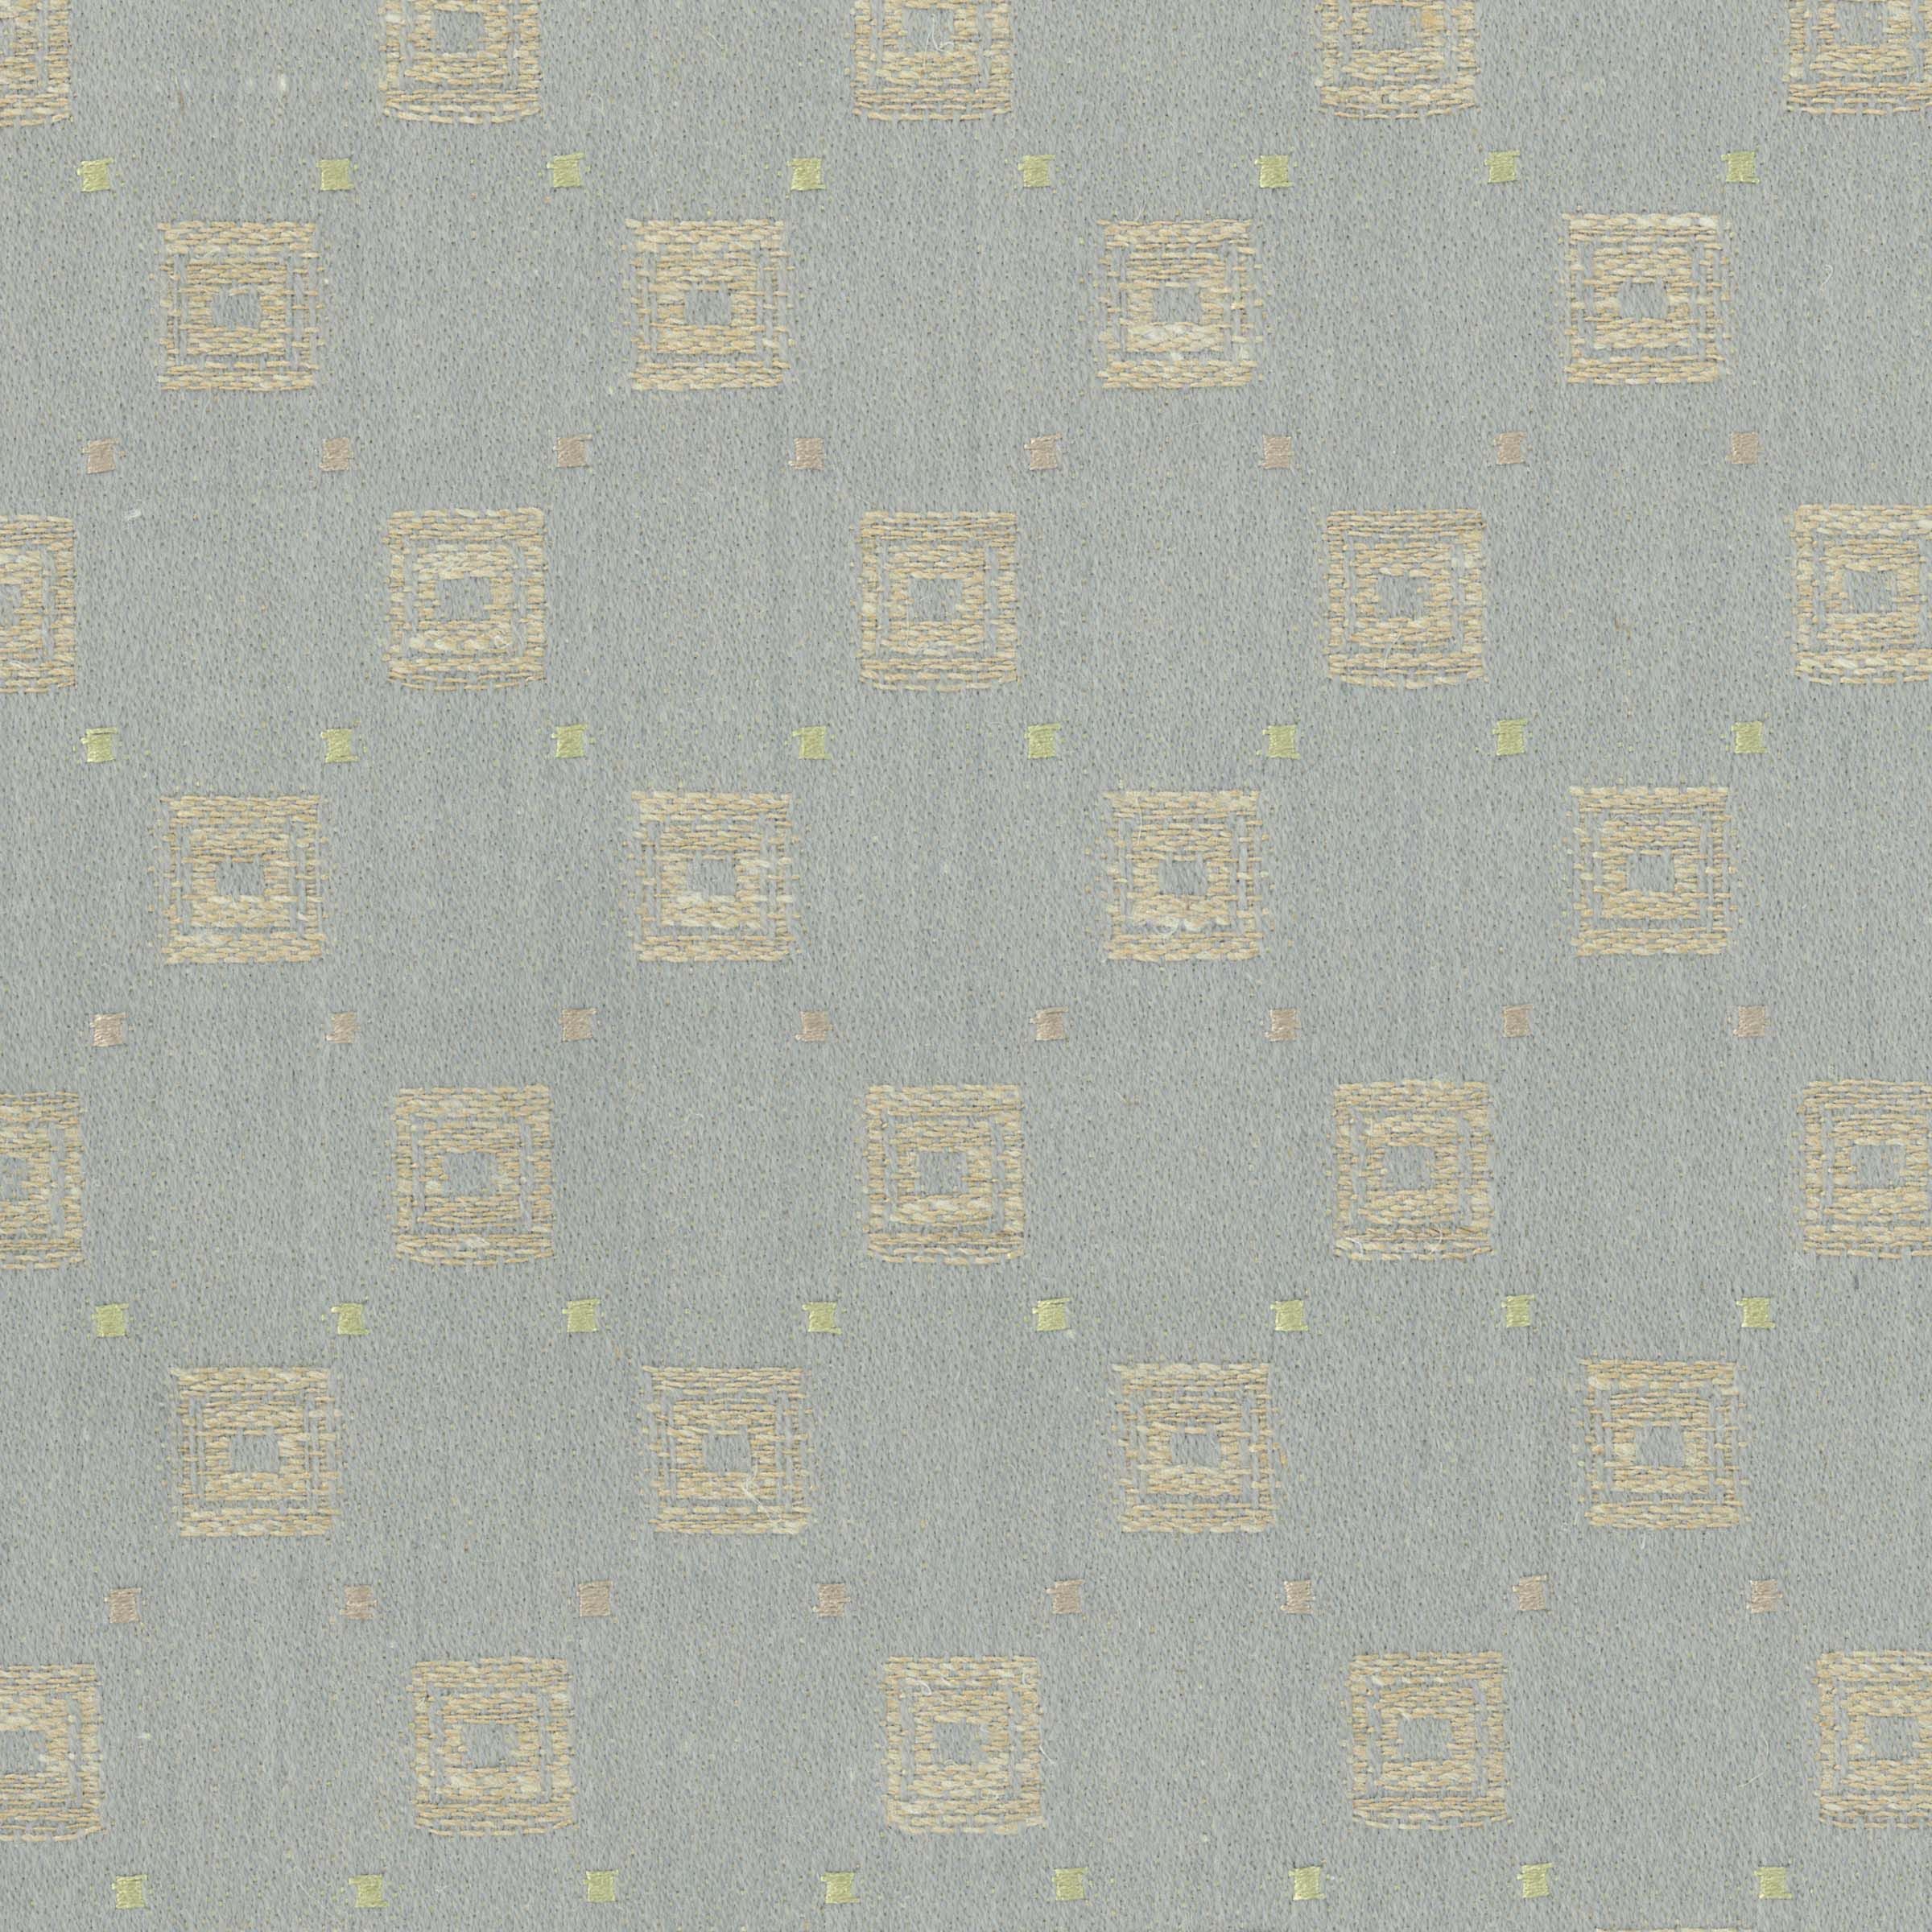 Livingston fabric in heather color - pattern number RV 00011469 - by Scalamandre in the Old World Weavers collection